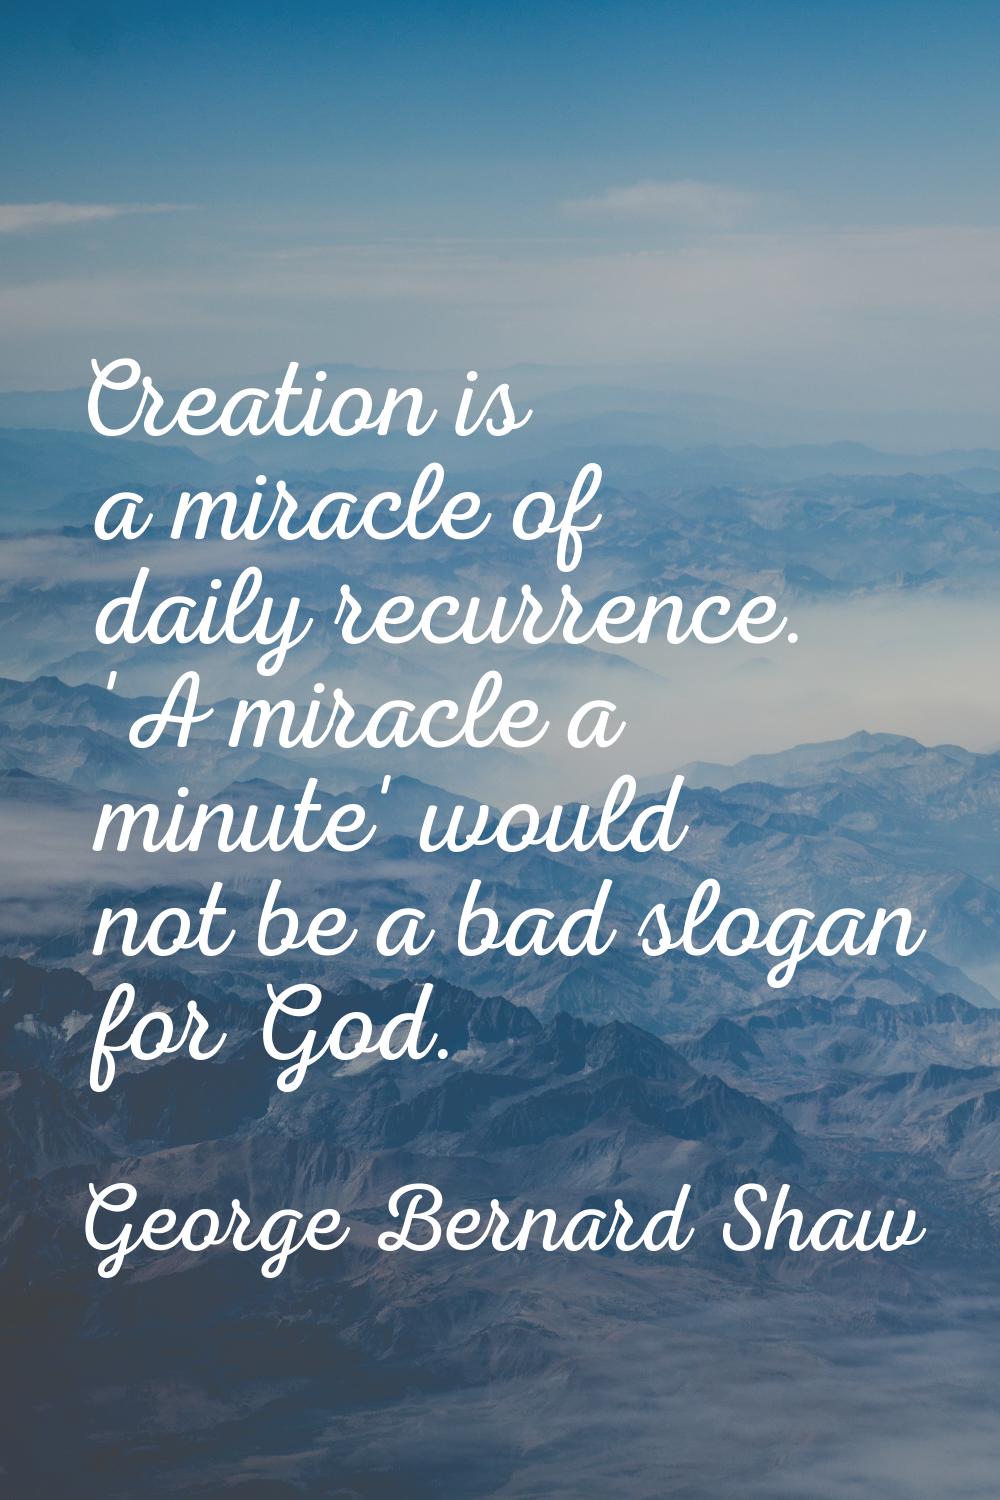 Creation is a miracle of daily recurrence. 'A miracle a minute' would not be a bad slogan for God.